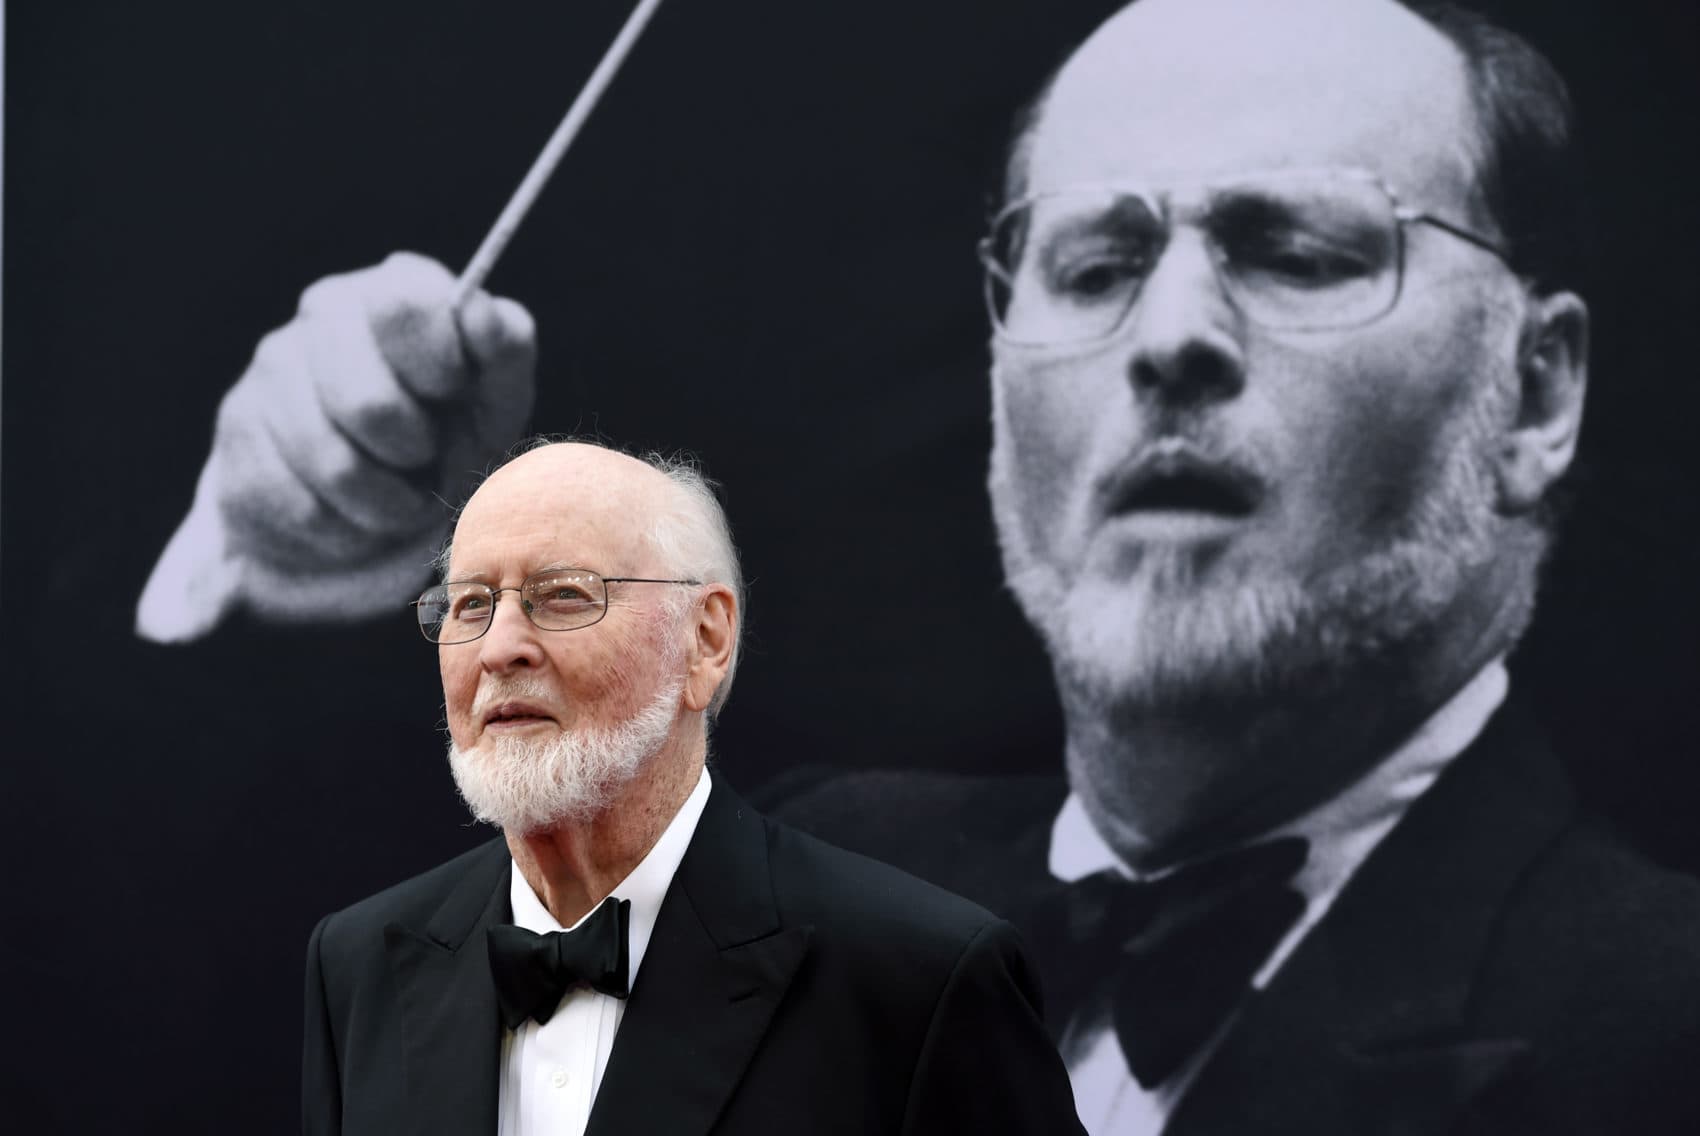 John Williams poses on the red carpet at the 2016 AFI Life Achievement Award Gala Tribute to himself at the Dolby Theatre in Los Angeles. (Chris Pizzello/Invision/AP)